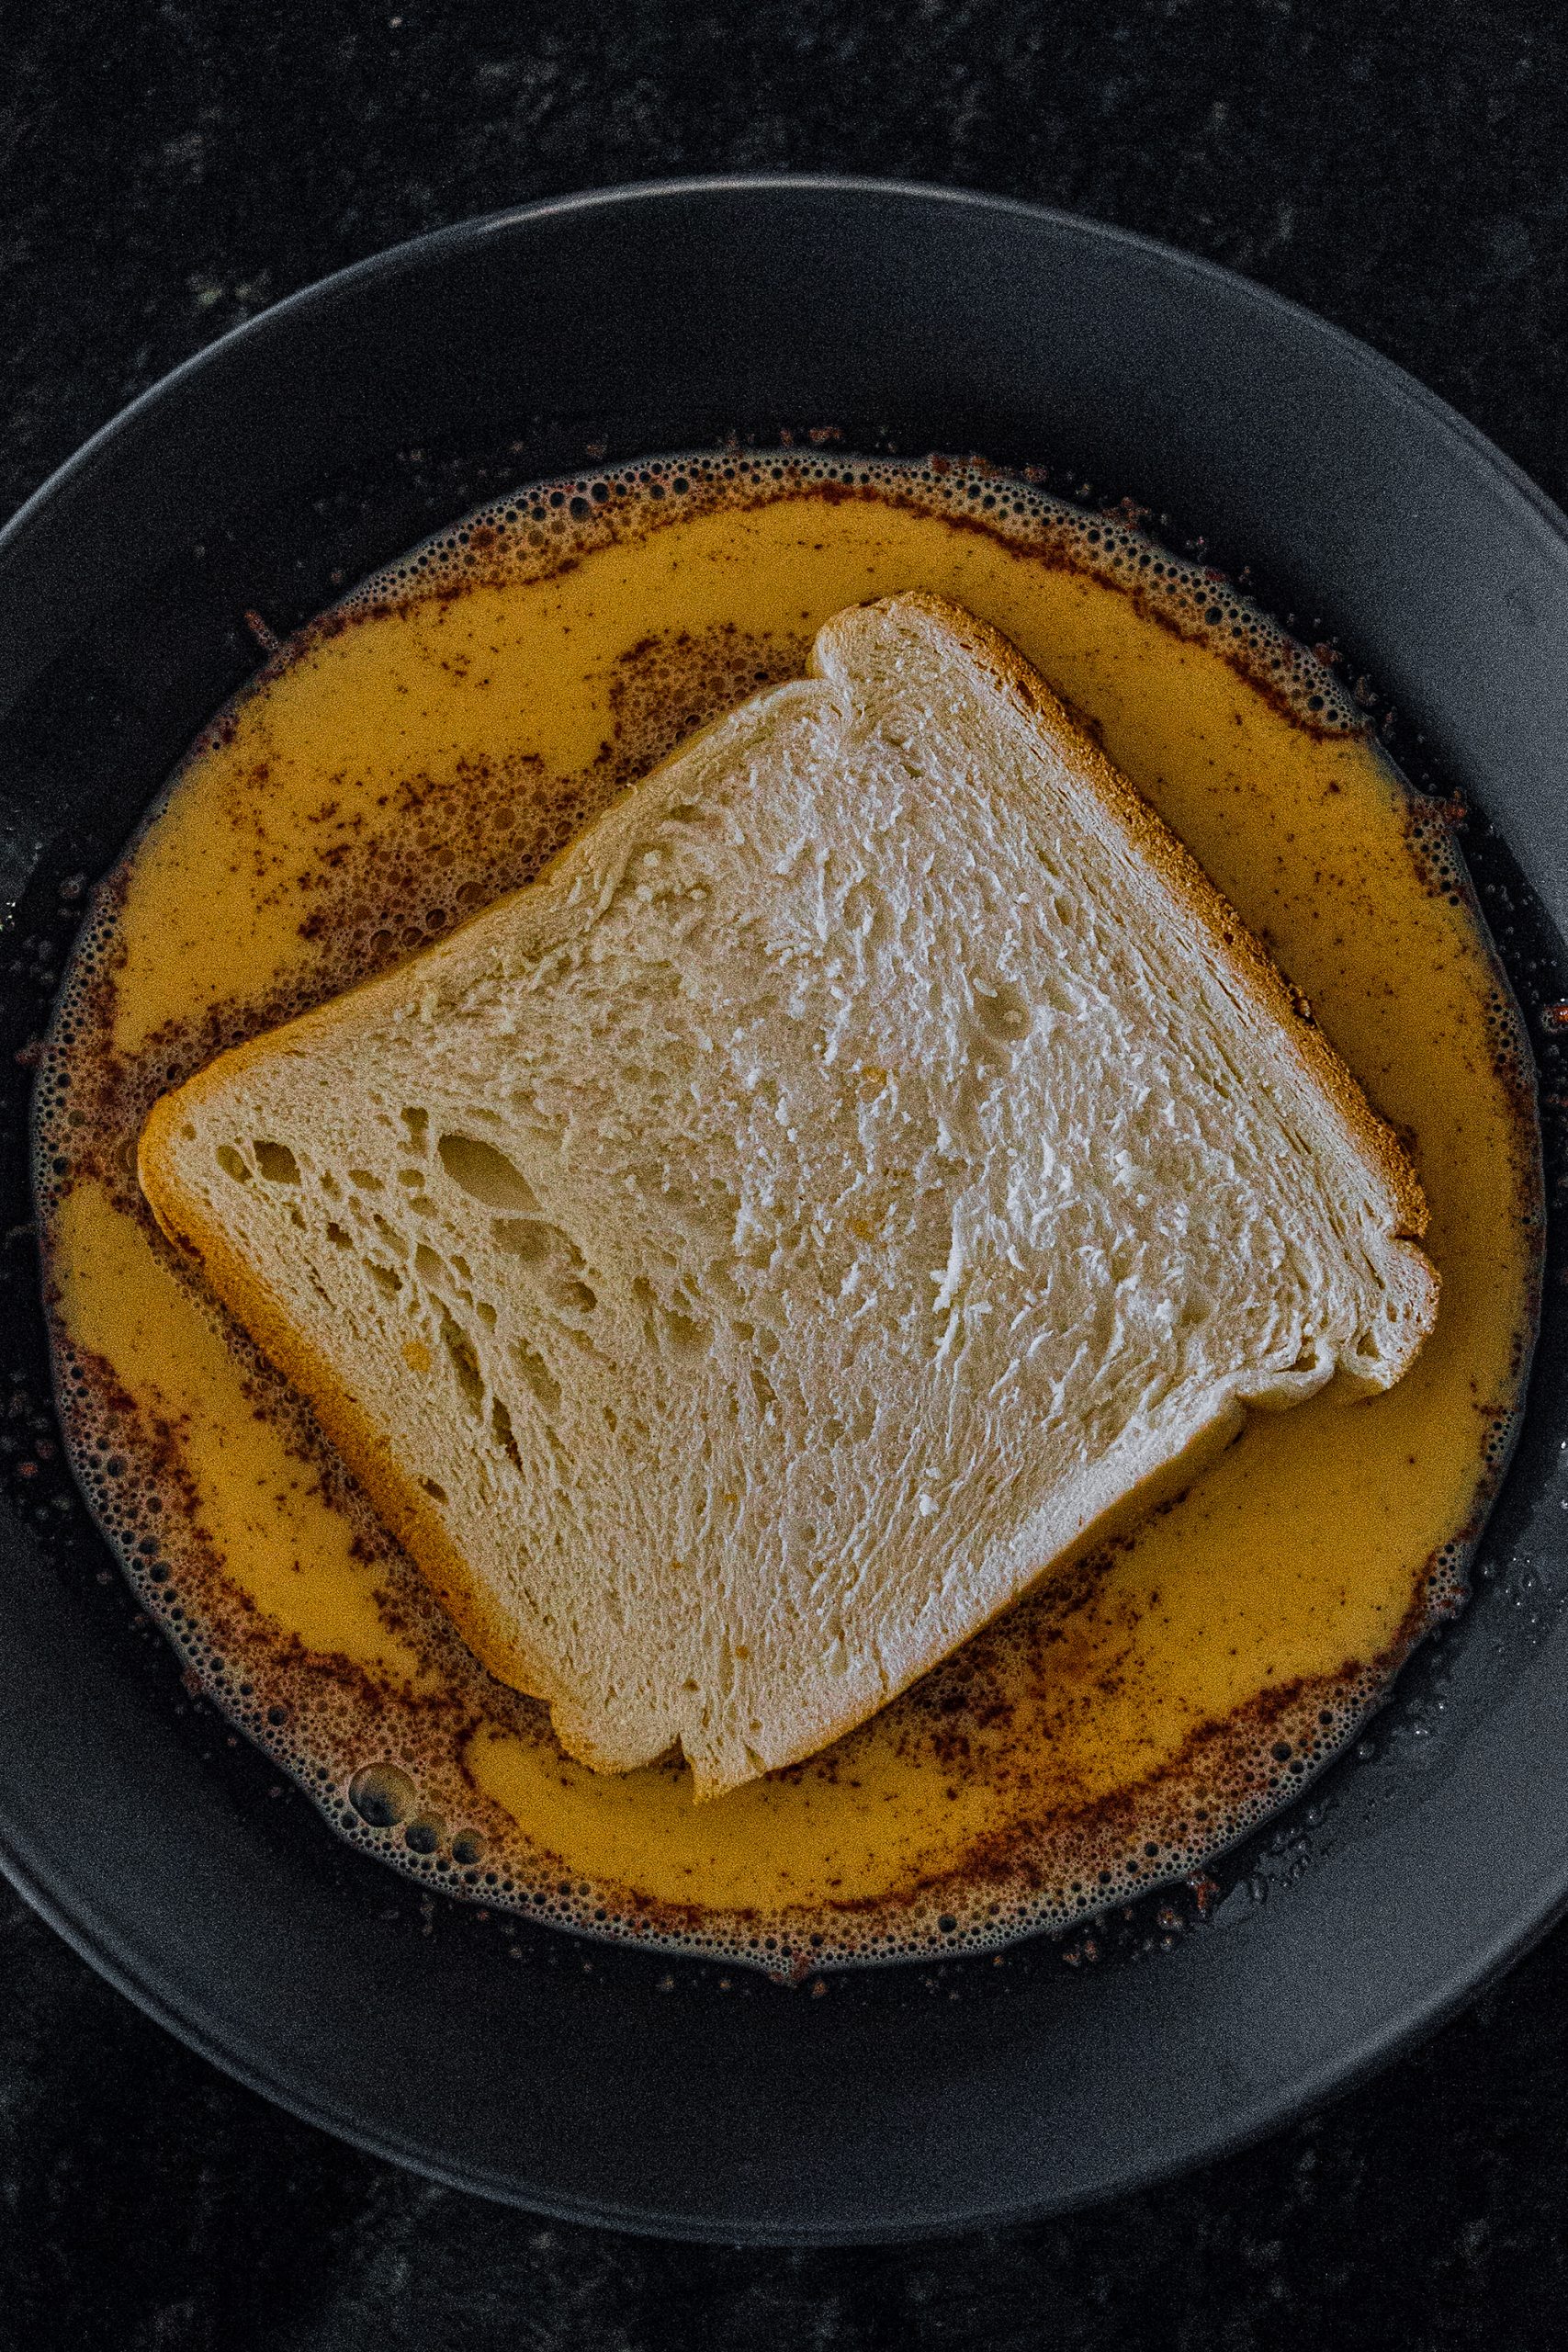 Place each slice of bread in egg mixture, ensuring both sides are soaked.